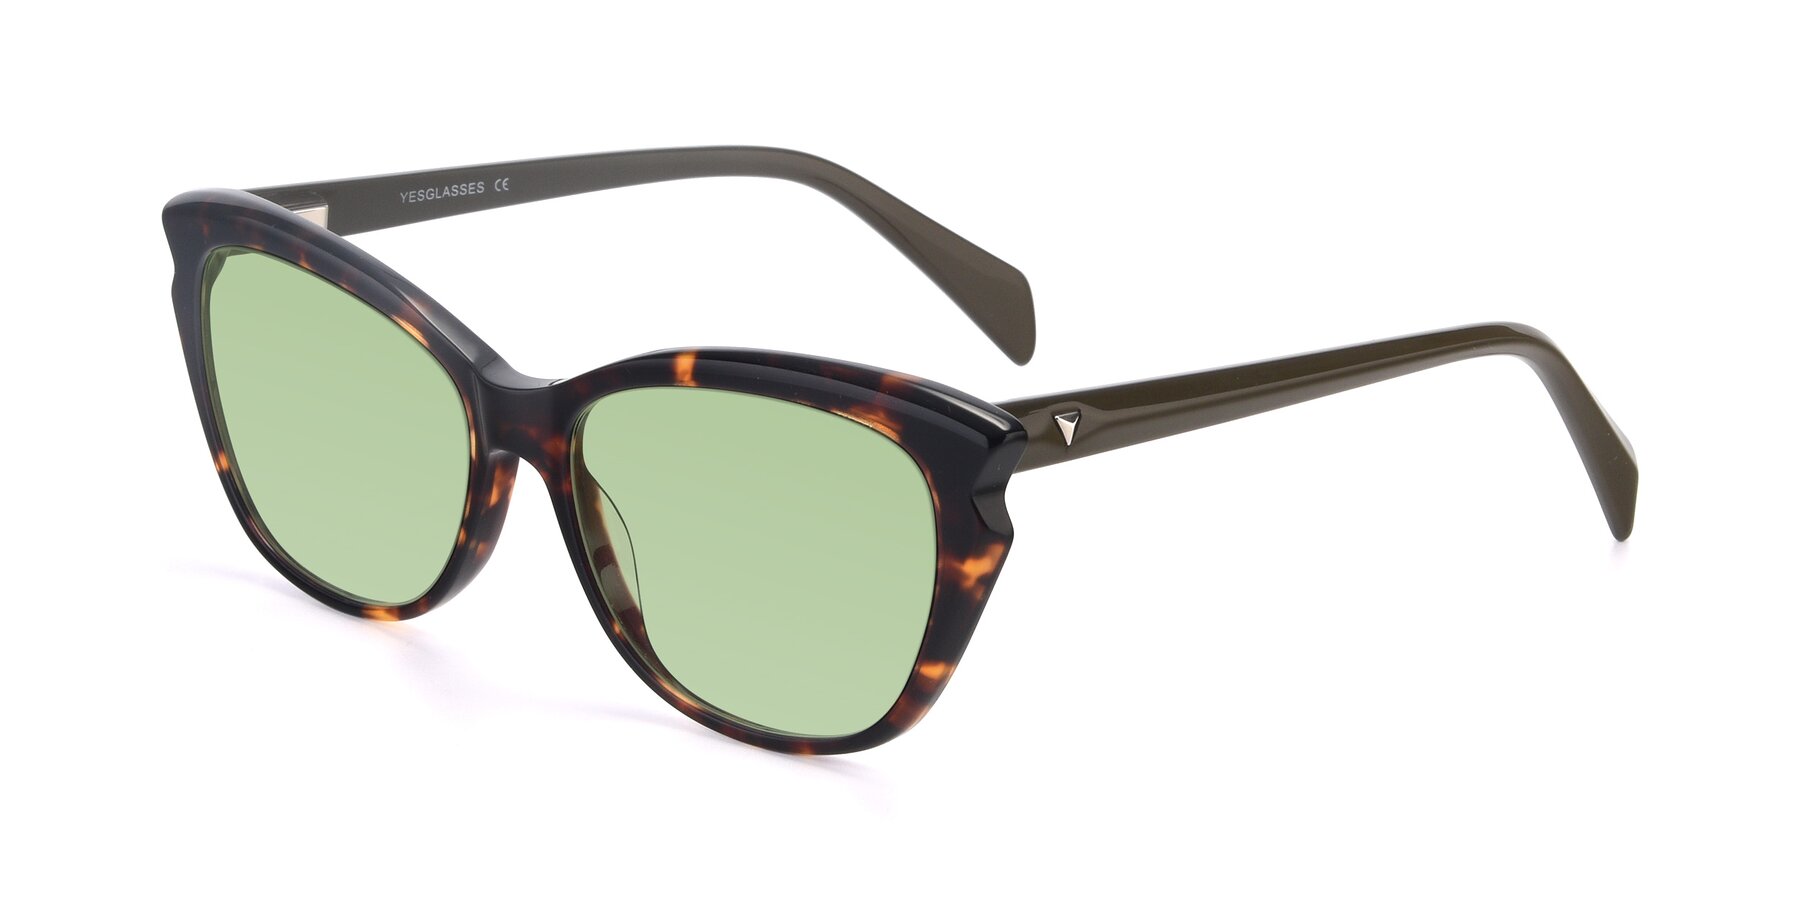 Angle of 17629 in Tortoise with Medium Green Tinted Lenses